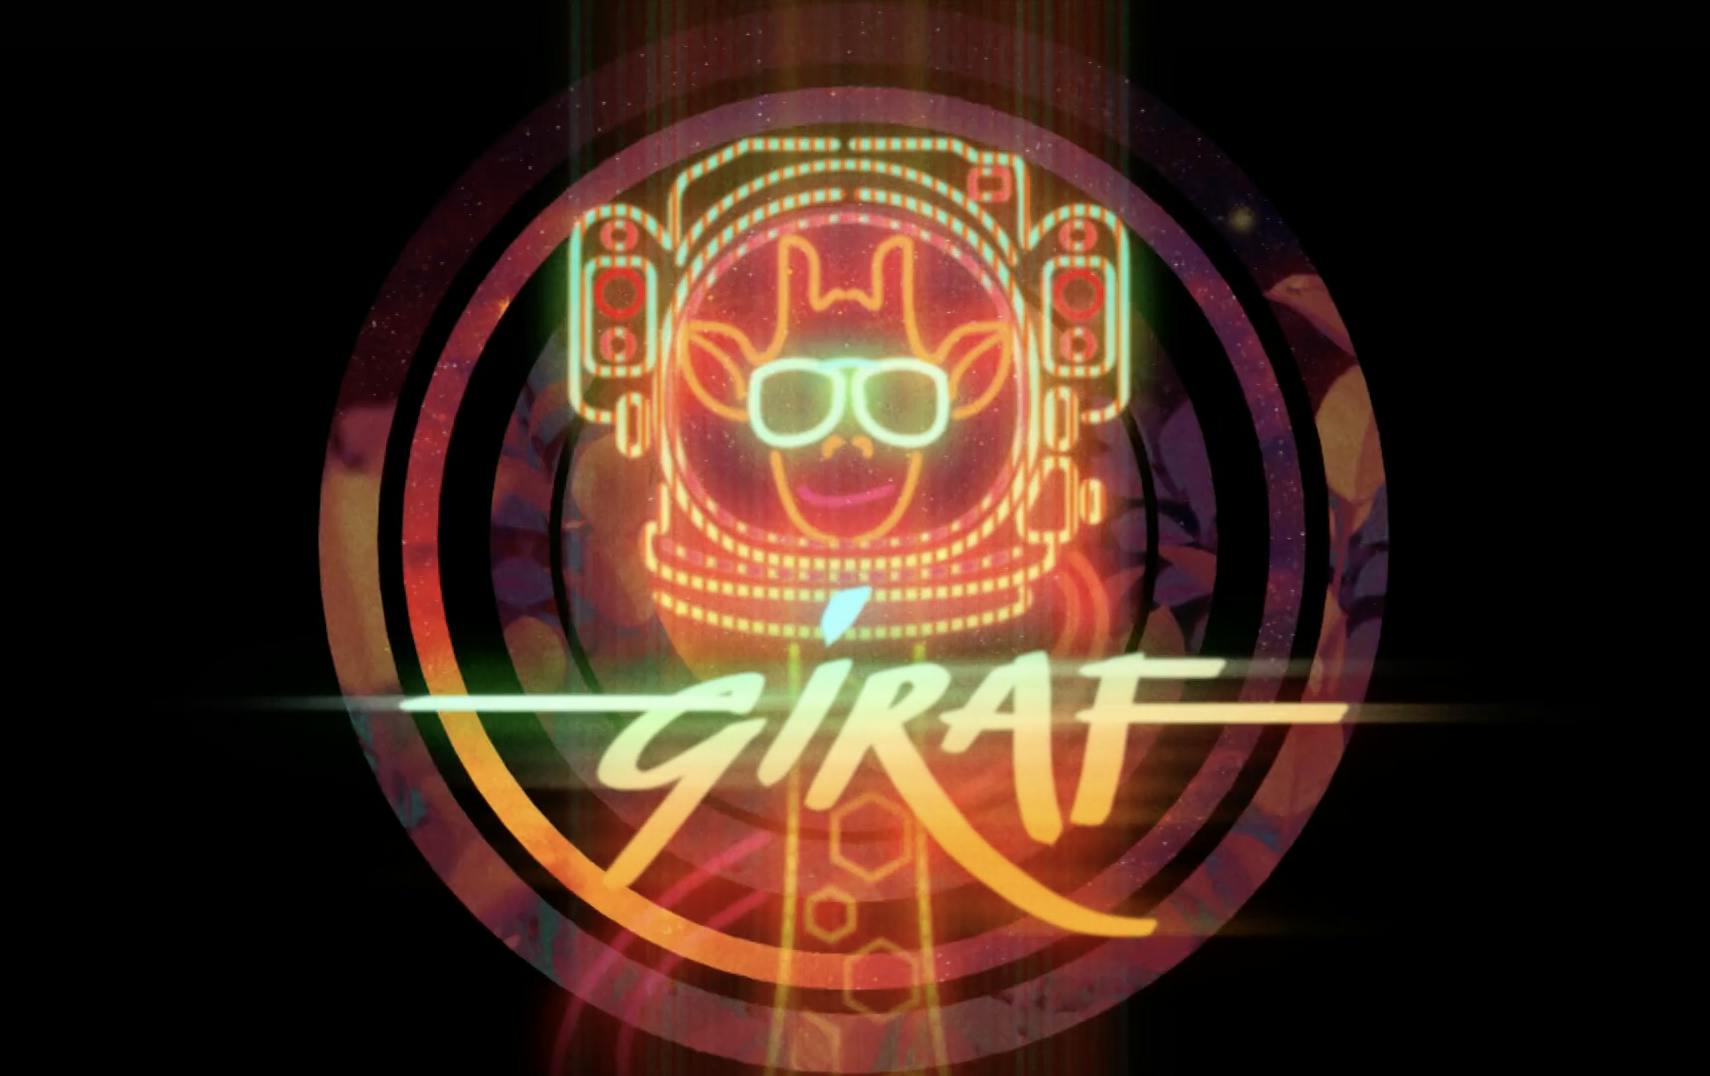 A neon-light giraffe, wearing sunglasses and a space helmet, in front of colourful concentric circles, with the word "GIRAF" written in stylized text.